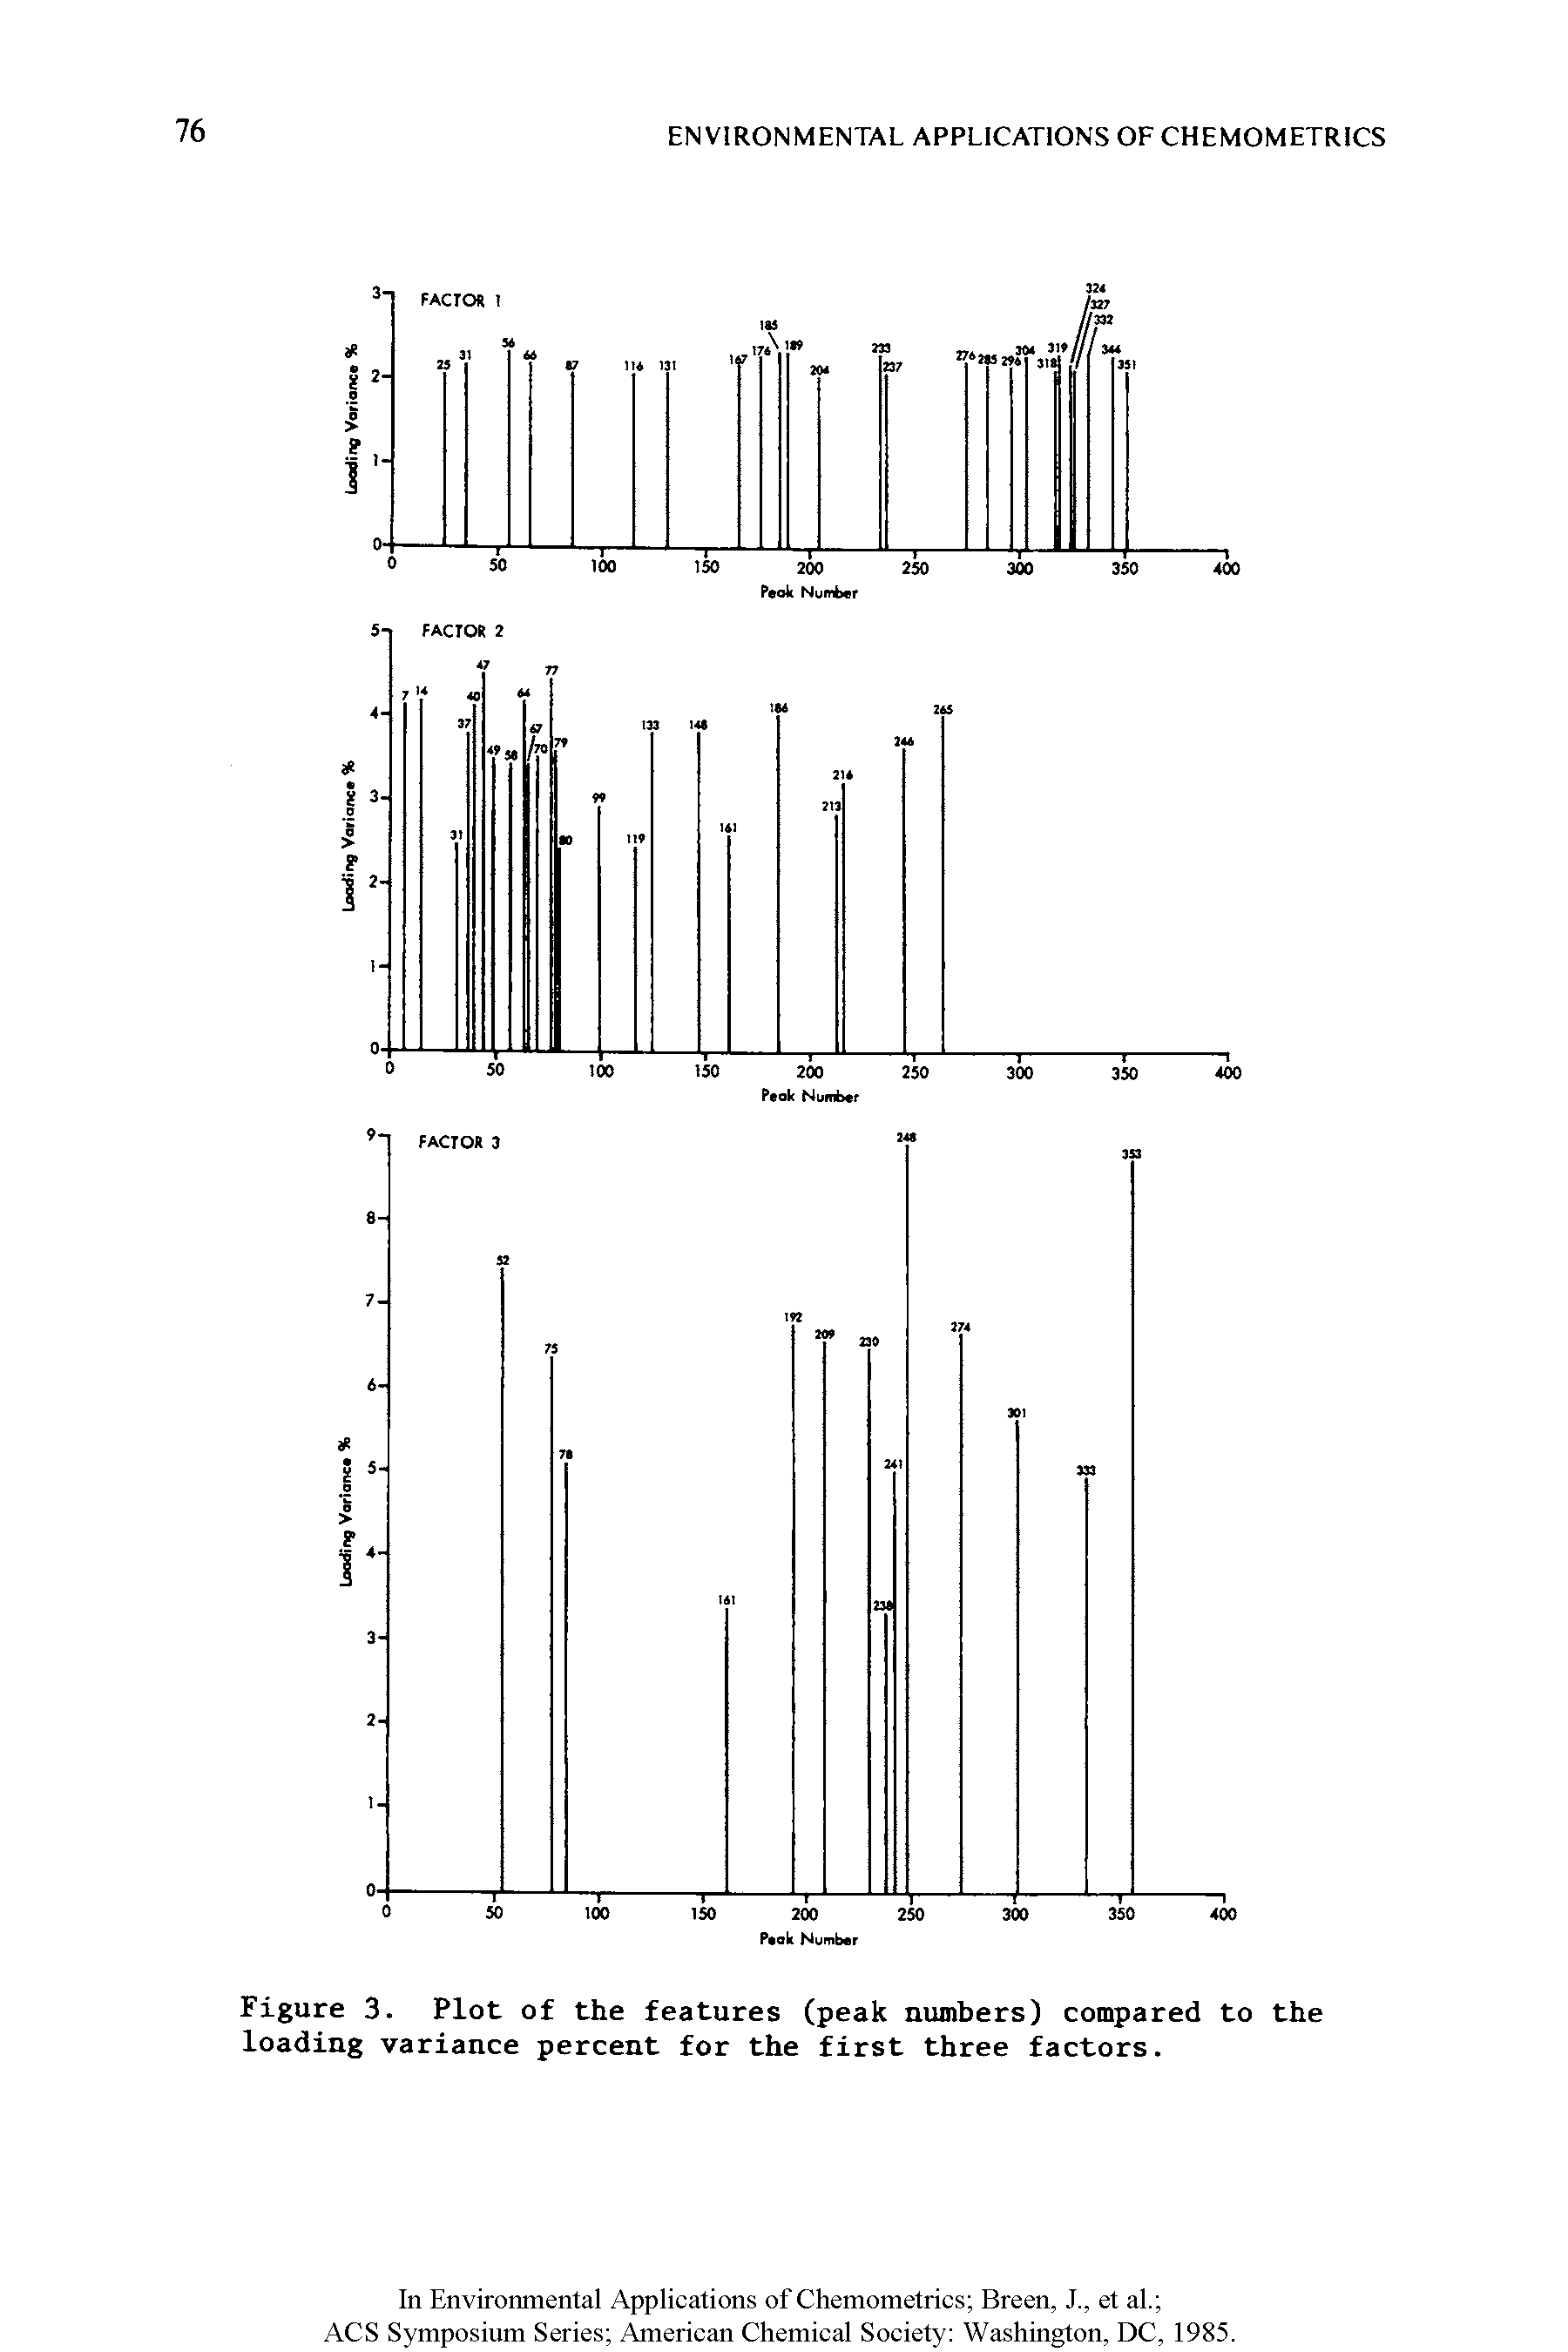 Figure 3. Plot of the features (peak numbers) compared to the loading variance percent for the first three factors.